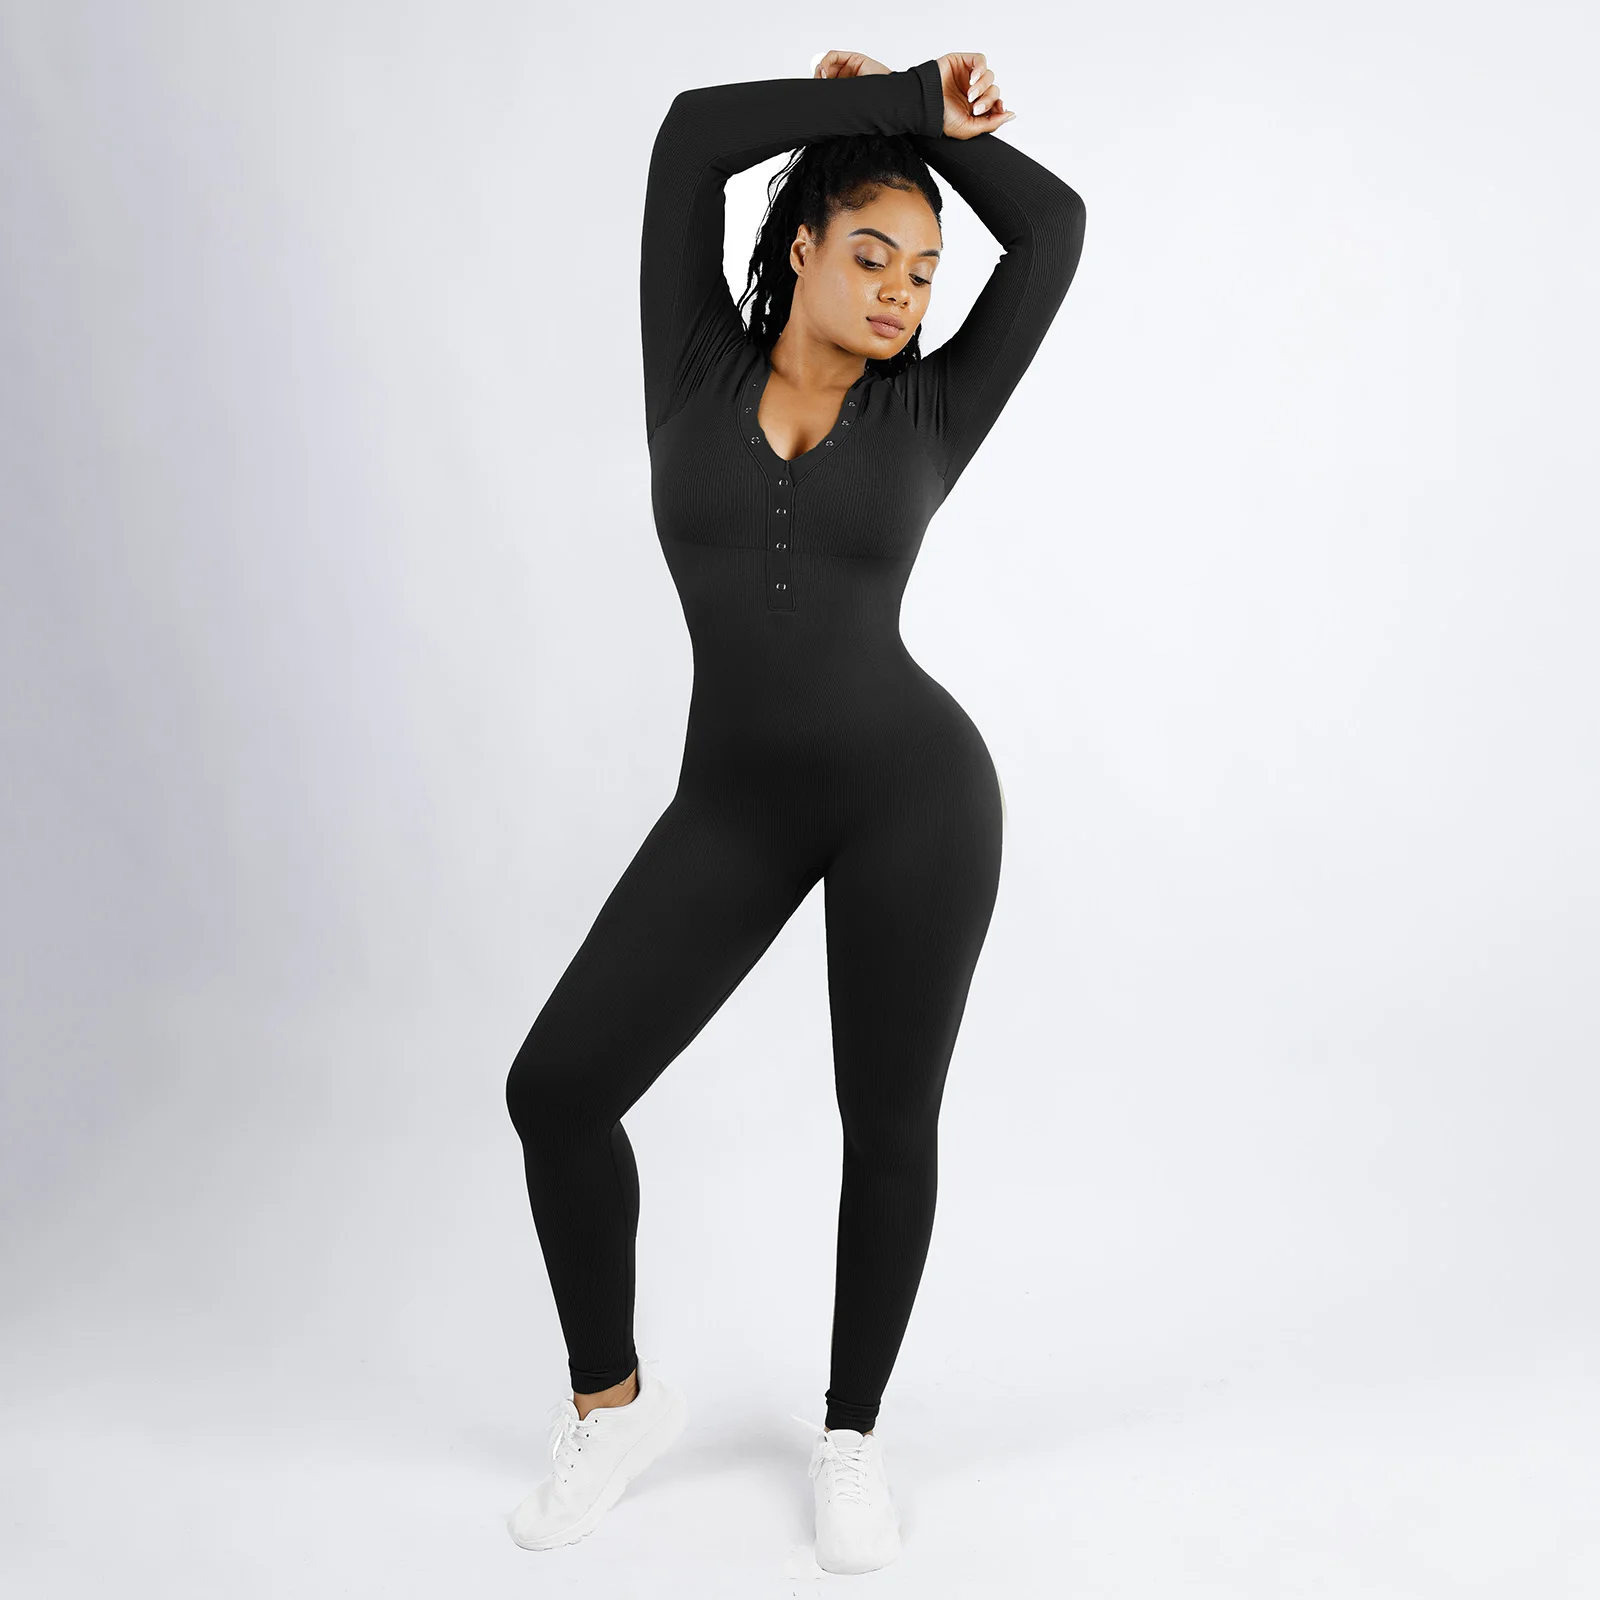 Wrinkle Textured Open Back Jumpsuit Fitness Workout Clothes - Buy Fitness  Workout Clothes,Gym Wear Outfits,Discount Fitness Clothing Product on  Alibaba.com